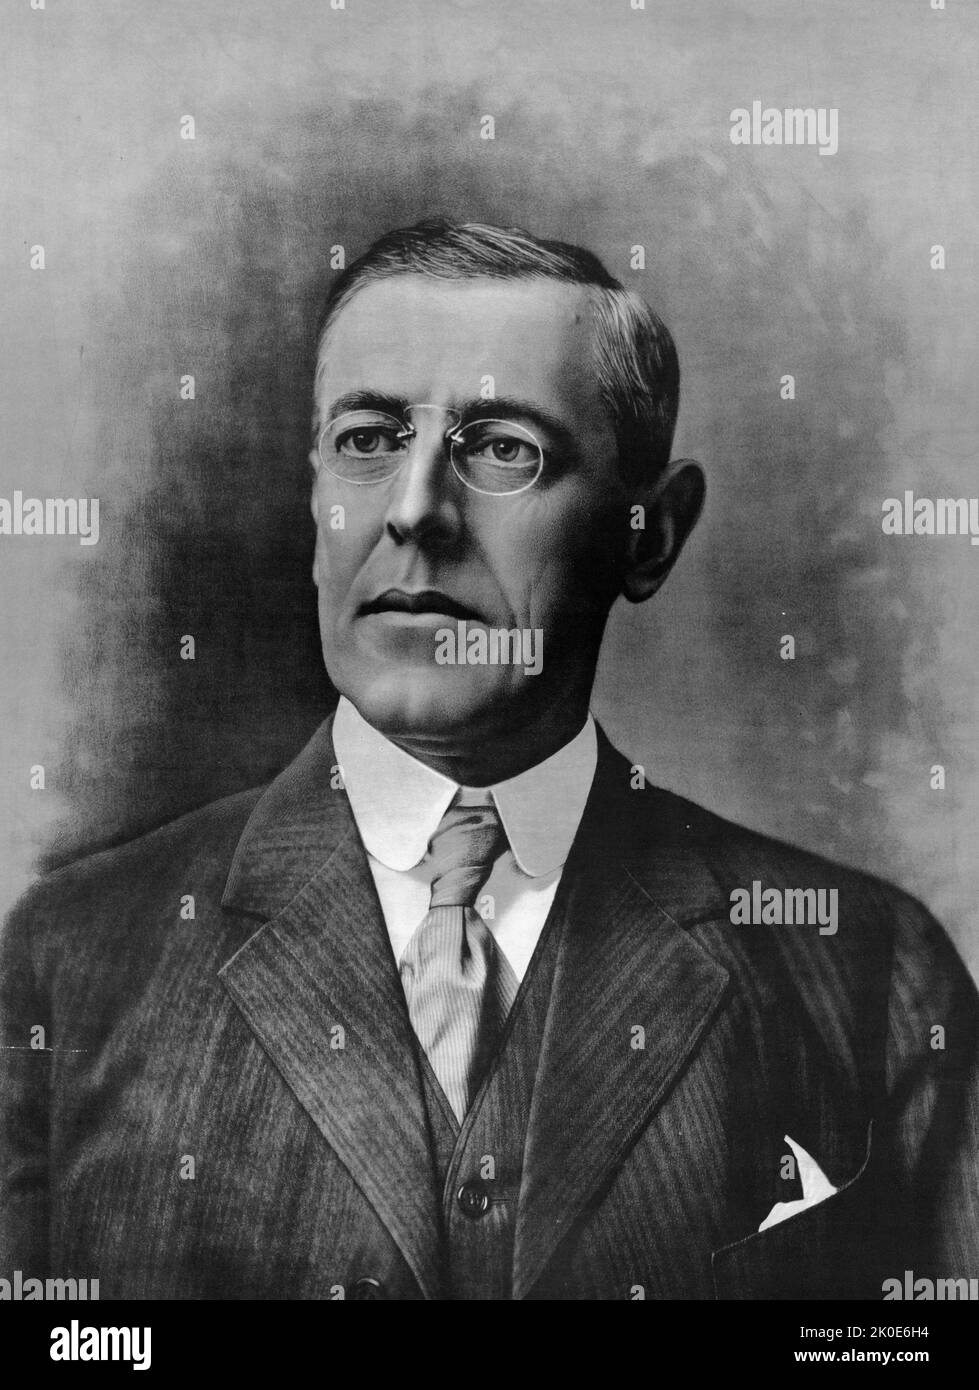 Thomas Woodrow Wilson (December 28, 1856 - February 3, 1924) was an American politician and academic who served as the 28th president of the United States from 1913 to 1921. Stock Photo